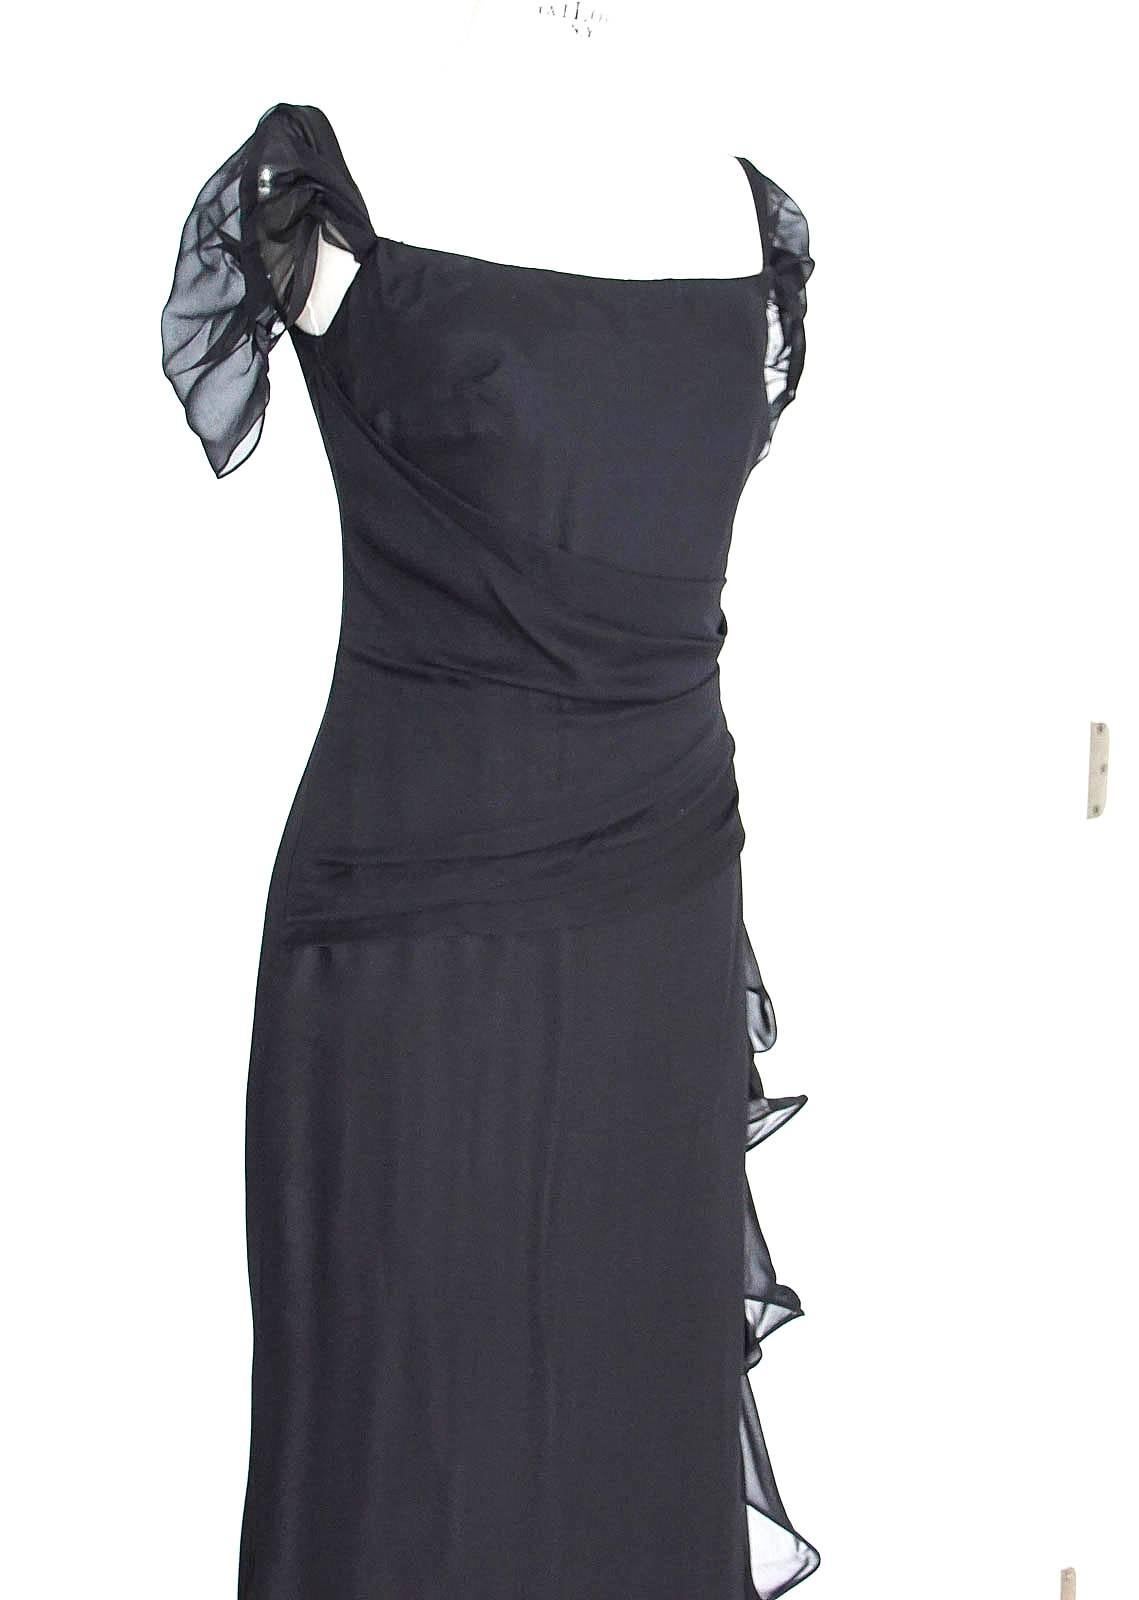 Guaranteed authentic Oscar de la Renta sophisticated and chic black silk chiffon evening gown.
Jet black silk chiffon dress.
Gently draping sheer chiffon cap sleeves.
In front fabric is softly rouched and angled towards the rear.
Interior has built